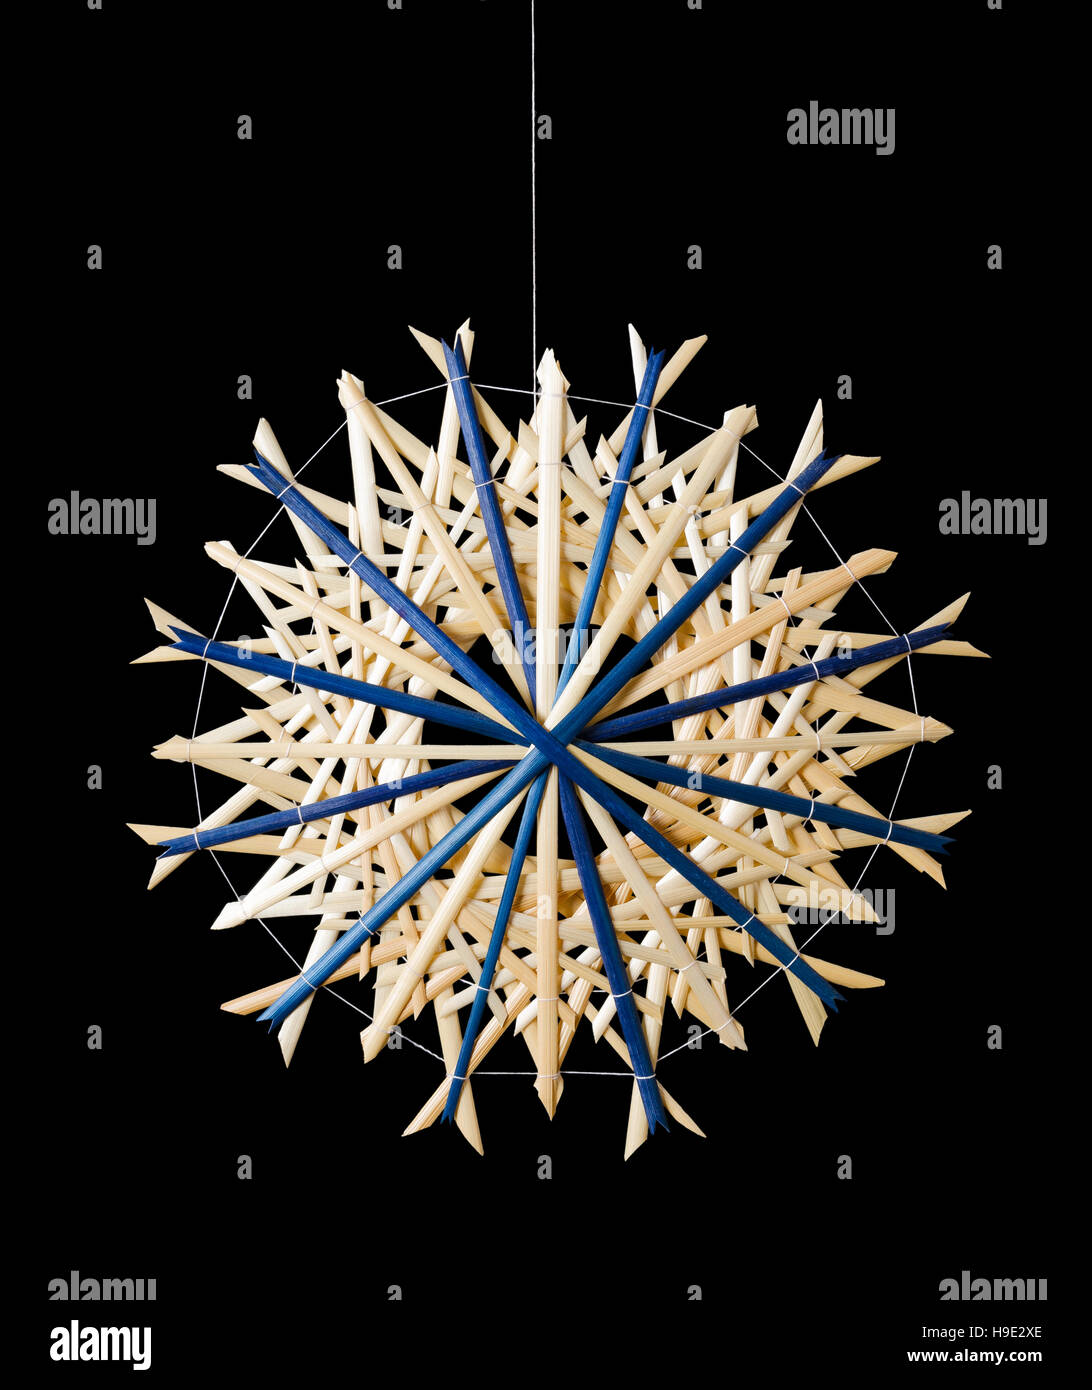 Blue straw star Christmas decoration on black background. Handmade decor for windows, as gifts or to hang on the xmas tree. Stock Photo